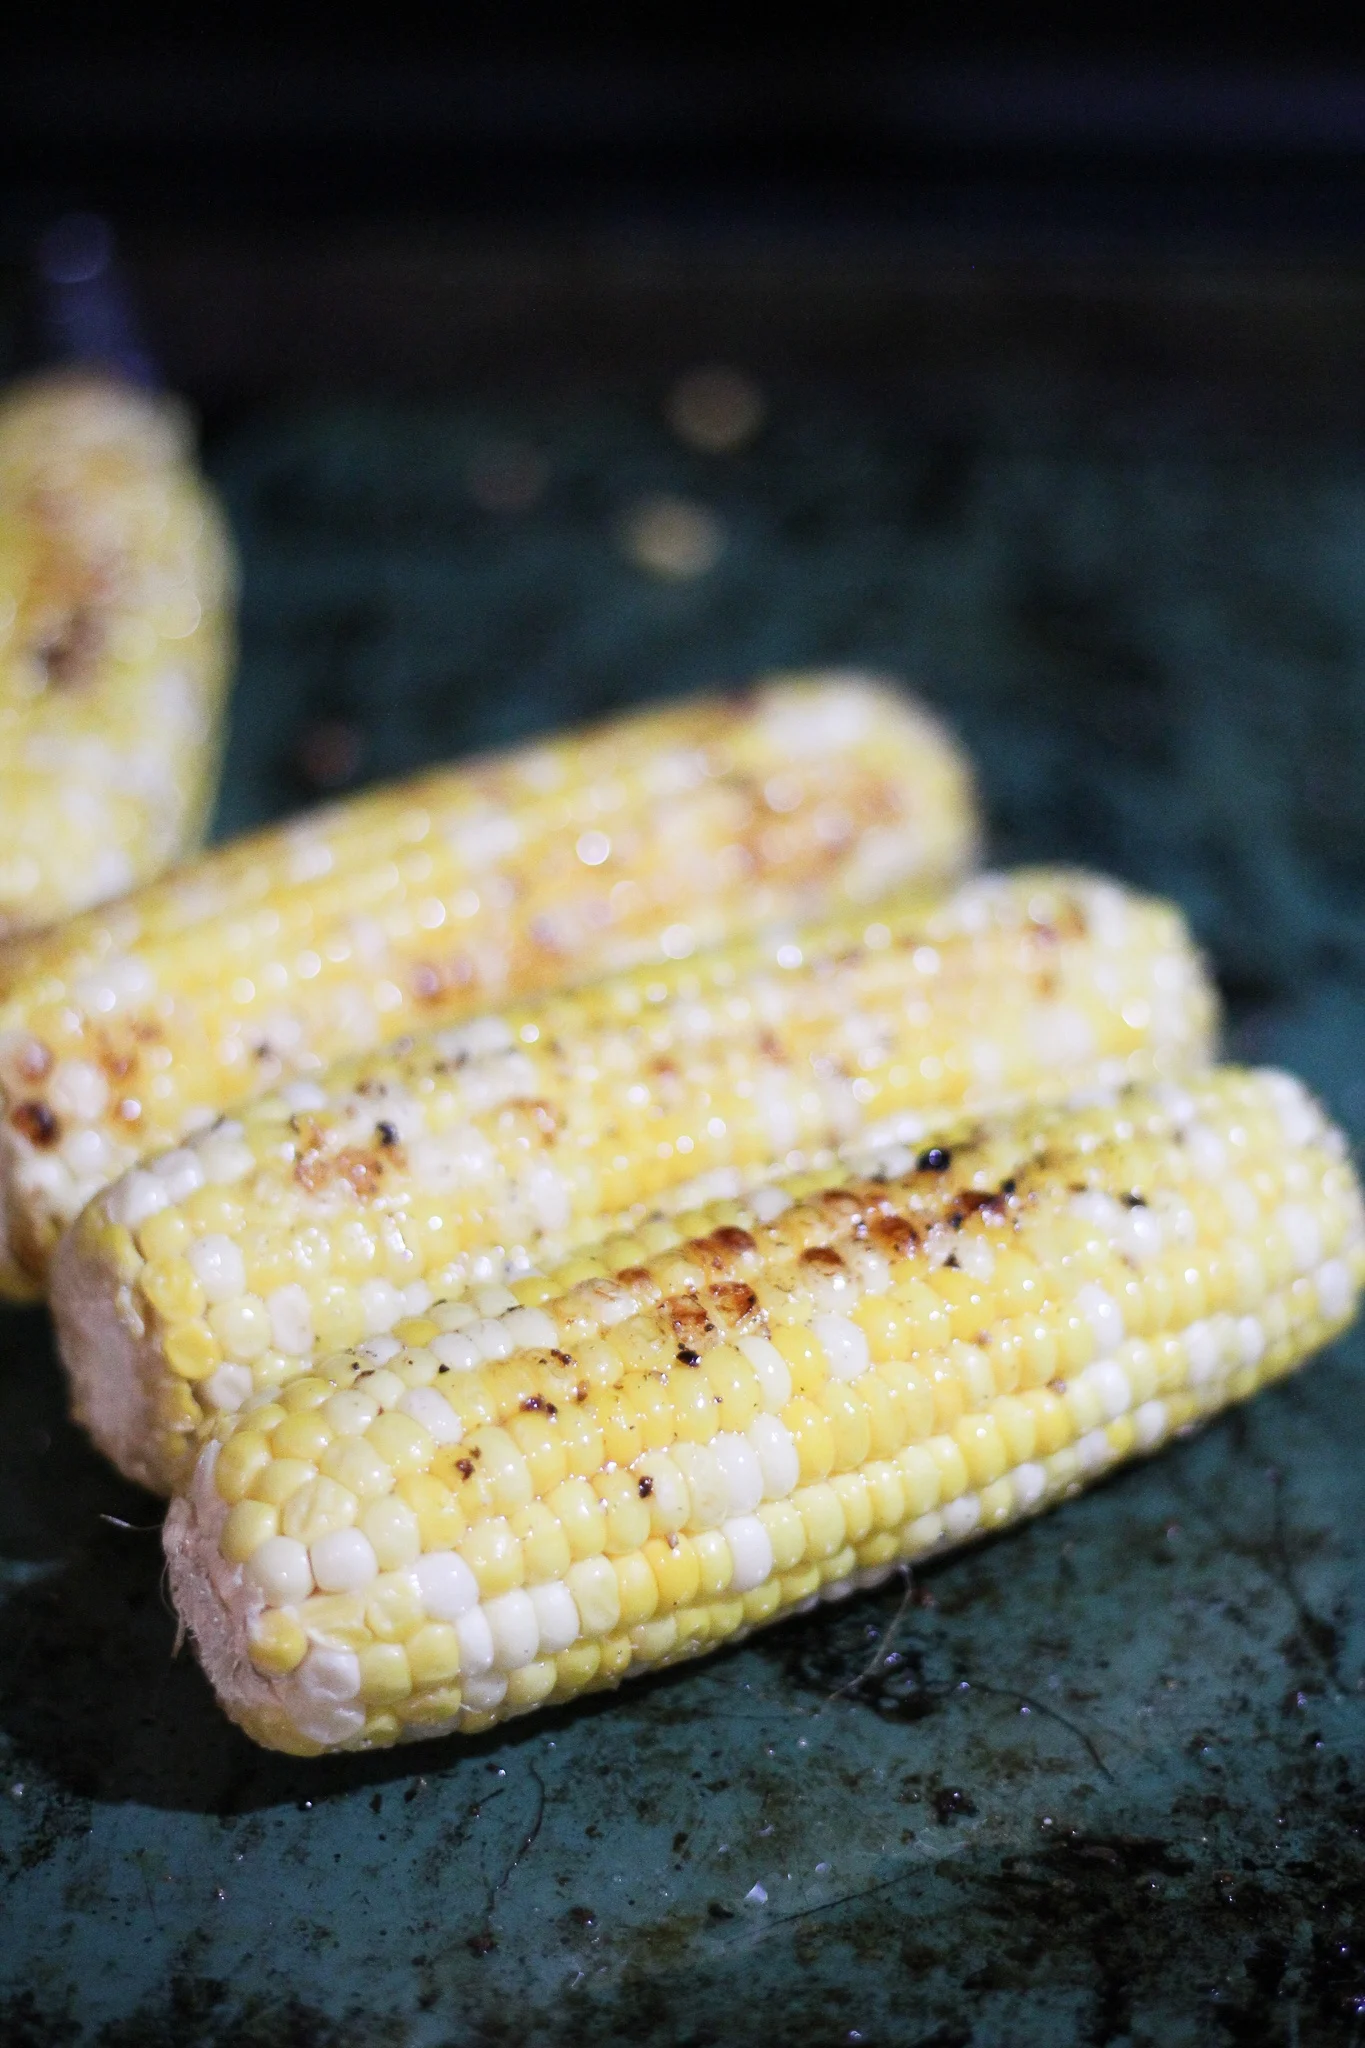 oven roasted corn on the cob